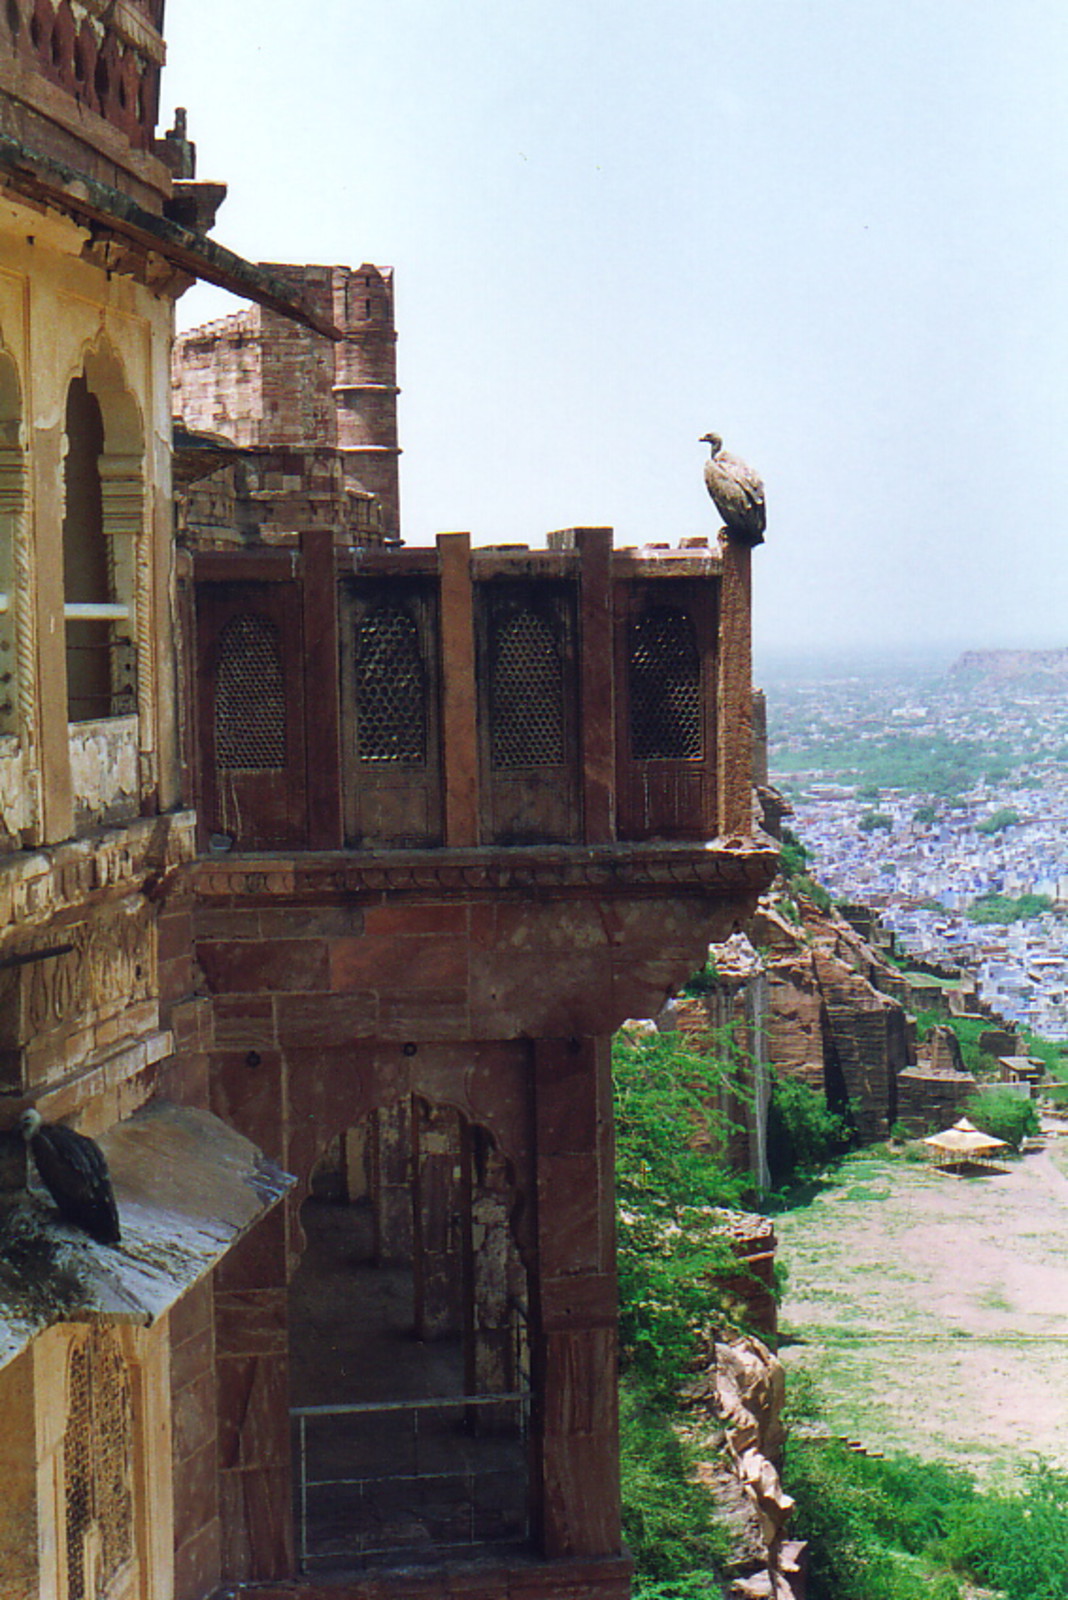 Birds perched on the ramparts of Mehrangarh Fort